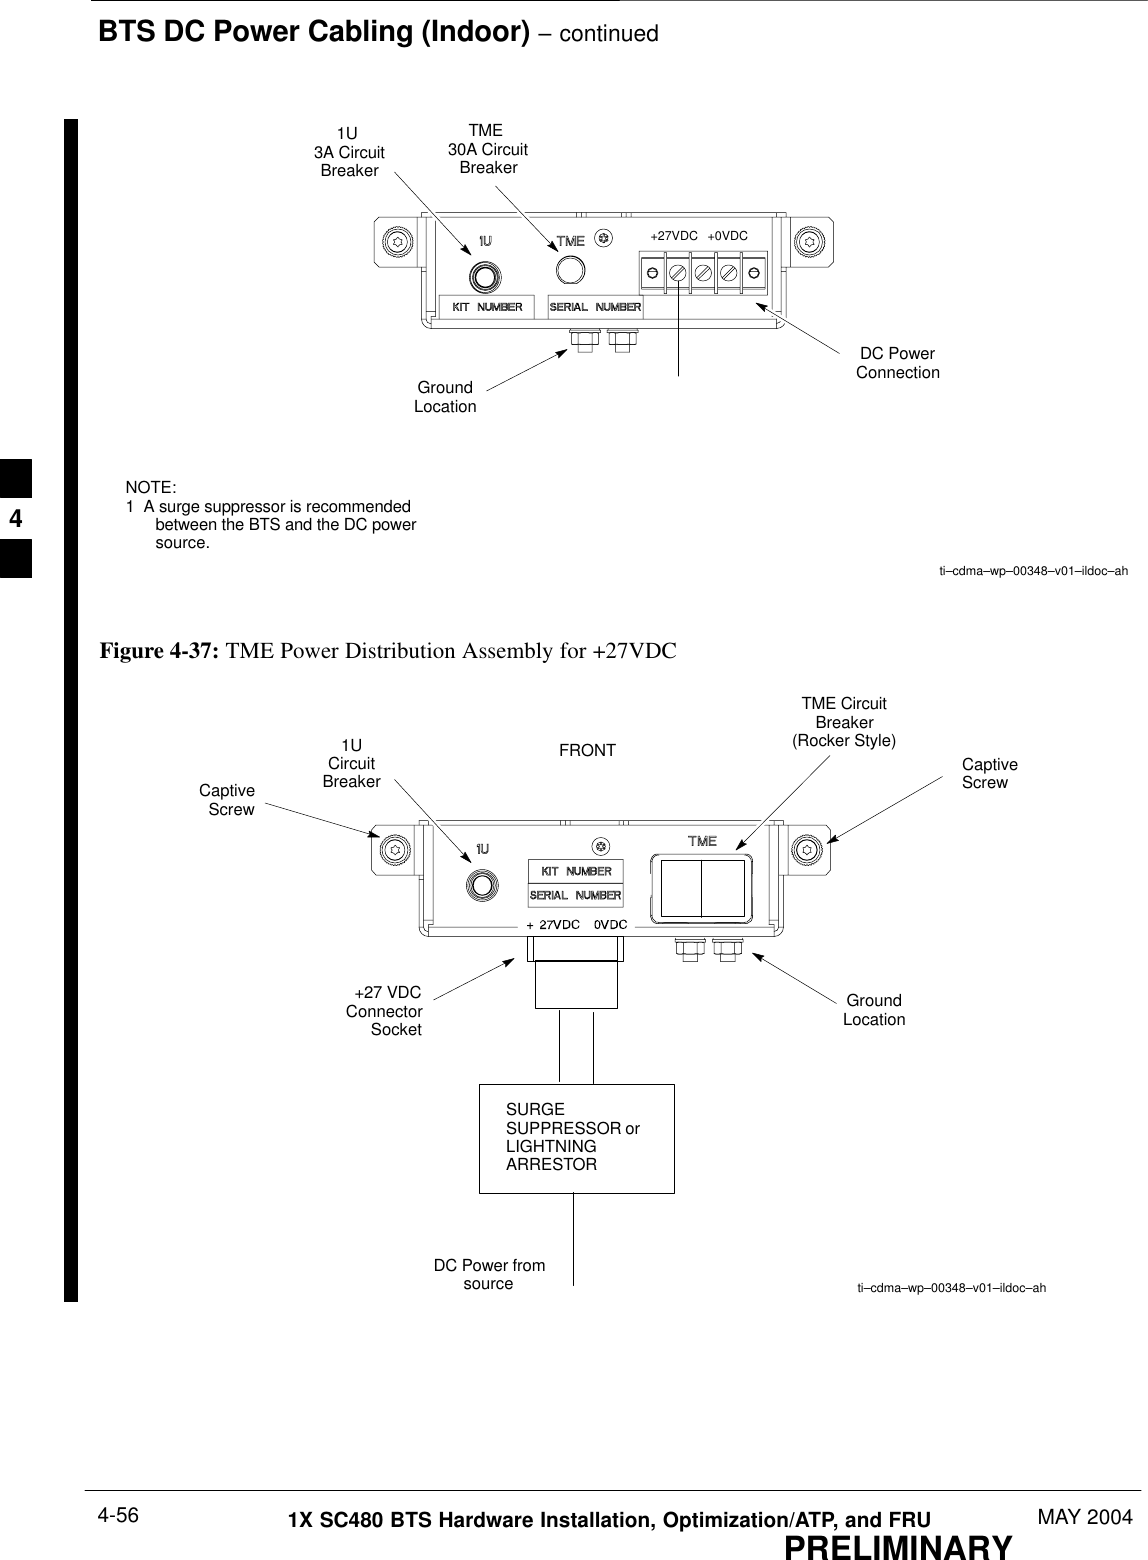 BTS DC Power Cabling (Indoor) – continuedPRELIMINARY1X SC480 BTS Hardware Installation, Optimization/ATP, and FRU MAY 20044-56ti–cdma–wp–00348–v01–ildoc–ahGroundLocation1U 3A CircuitBreakerTME 30A CircuitBreakerDC PowerConnection+27VDC +0VDCNOTE:1  A surge suppressor is recommendedbetween the BTS and the DC powersource.CaptiveScrewCaptiveScrewFRONTti–cdma–wp–00348–v01–ildoc–ahGroundLocation1UCircuitBreakerTME CircuitBreaker(Rocker Style)+27 VDCConnectorSocketFigure 4-37: TME Power Distribution Assembly for +27VDCSURGESUPPRESSOR orLIGHTNINGARRESTORDC Power fromsource4